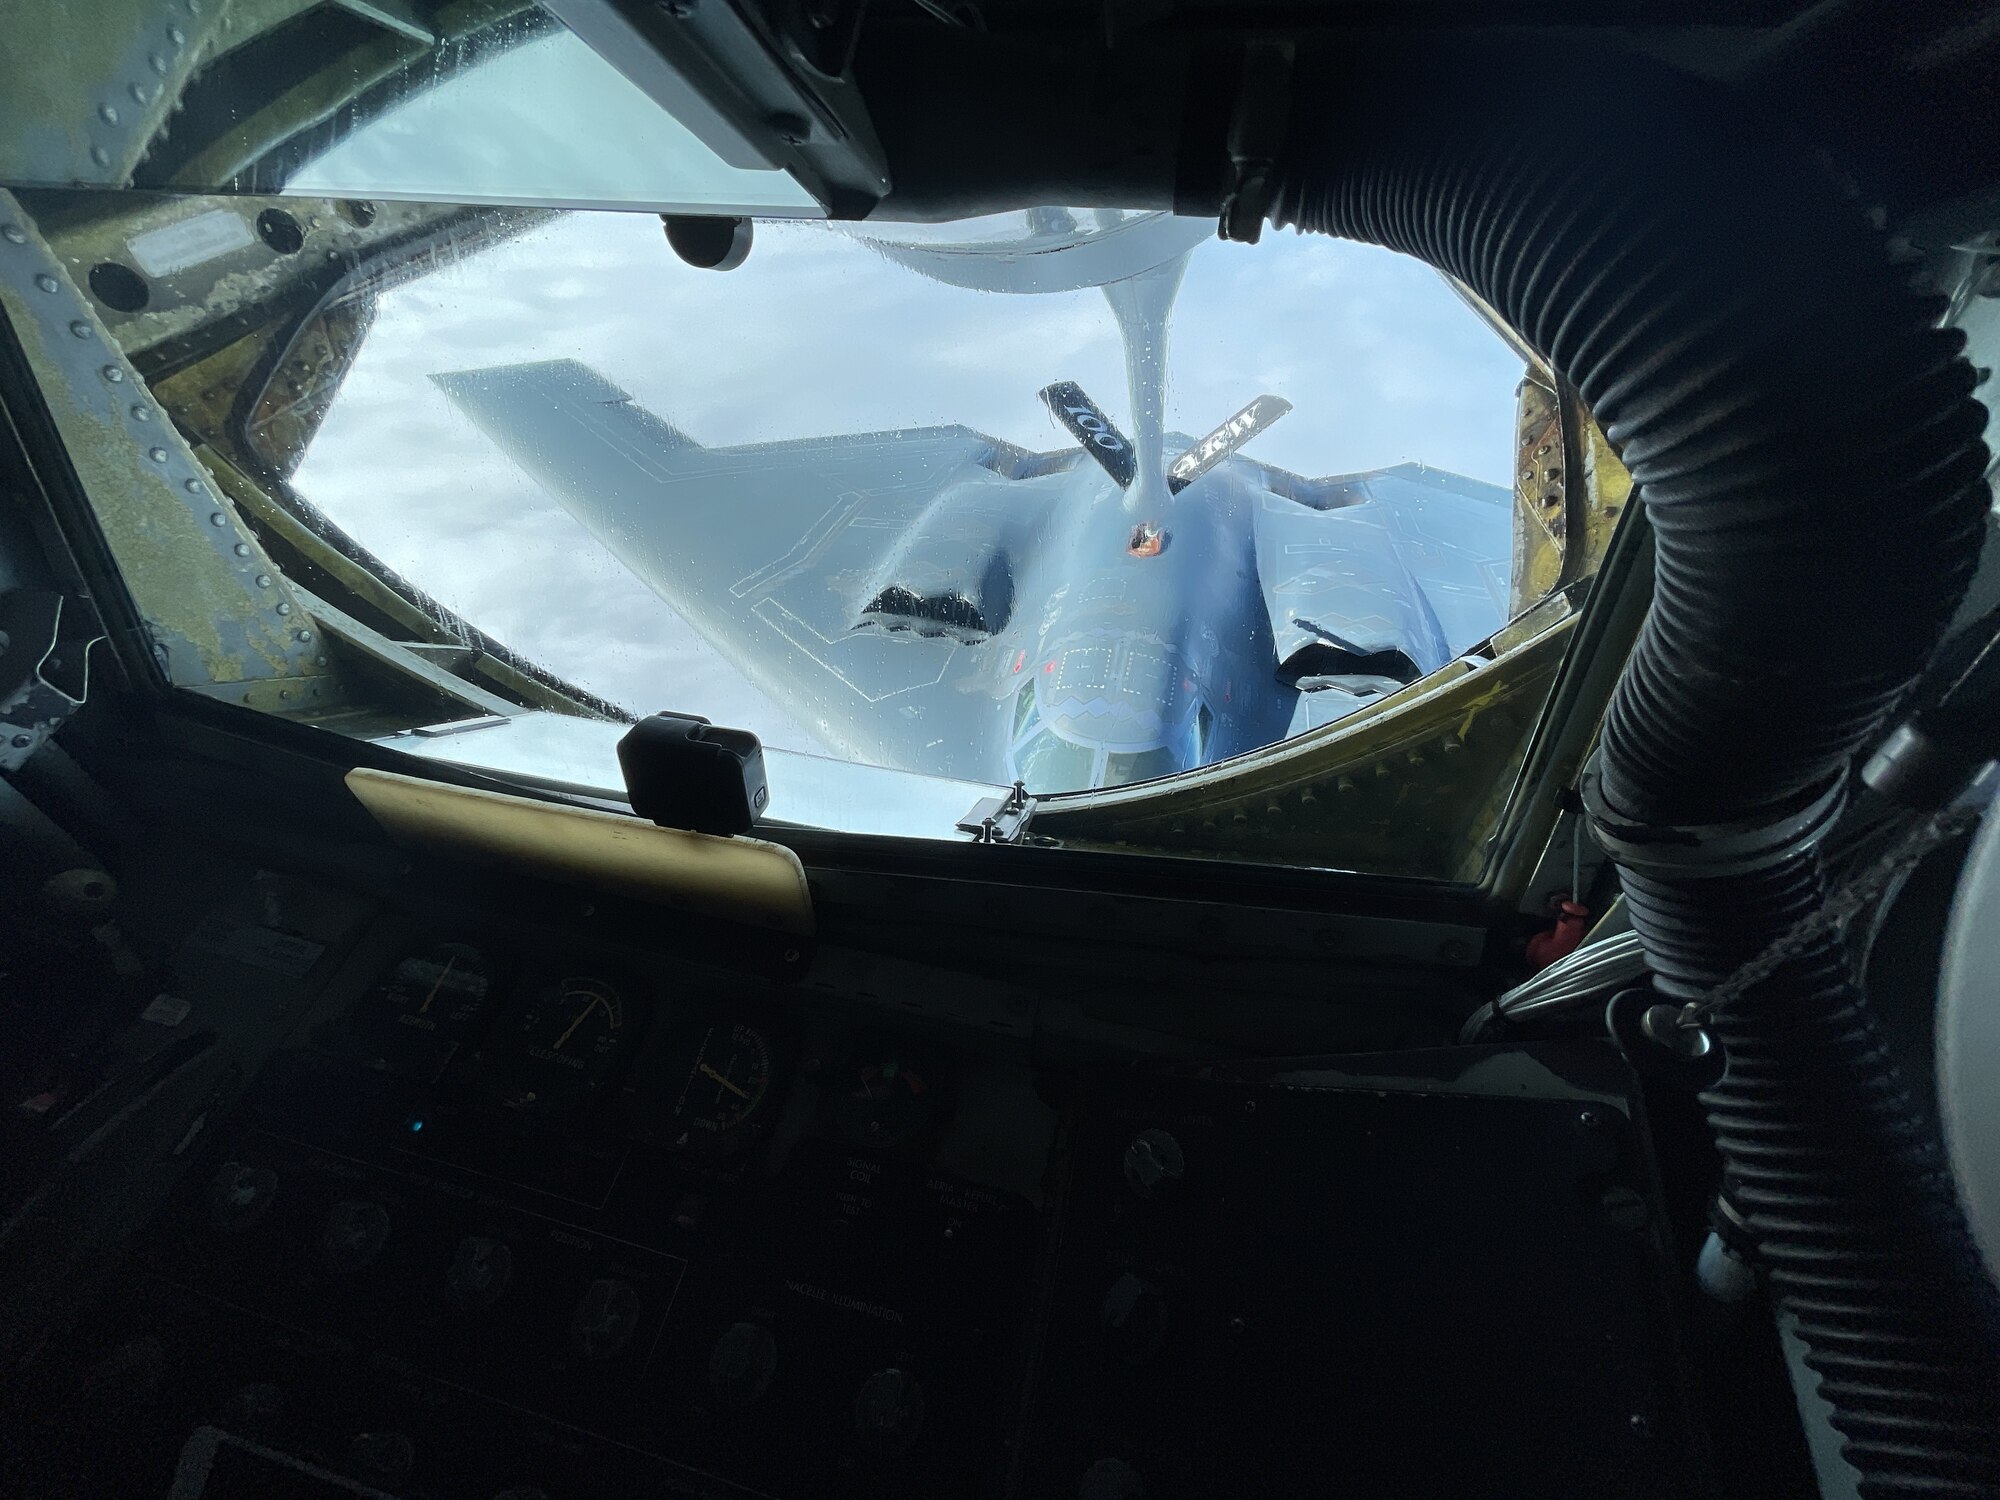 A U.S. Air Force B-2 Spirit aircraft assigned to the 509th Bomb Wing, Whiteman Air Force Base, Missouri, receives fuel from a KC-135 Stratotanker aircraft assigned to the 100th Air Refueling Wing, Royal Air Force Mildenhall, England, over Europe during a bomber task force mission Sept. 8, 2021. Strategic bomber missions familiarize aircrew with air bases and operations in different geographic combatant commands’ areas of operation. (U.S. Air Force photo by Senior Airman Joseph Barron)